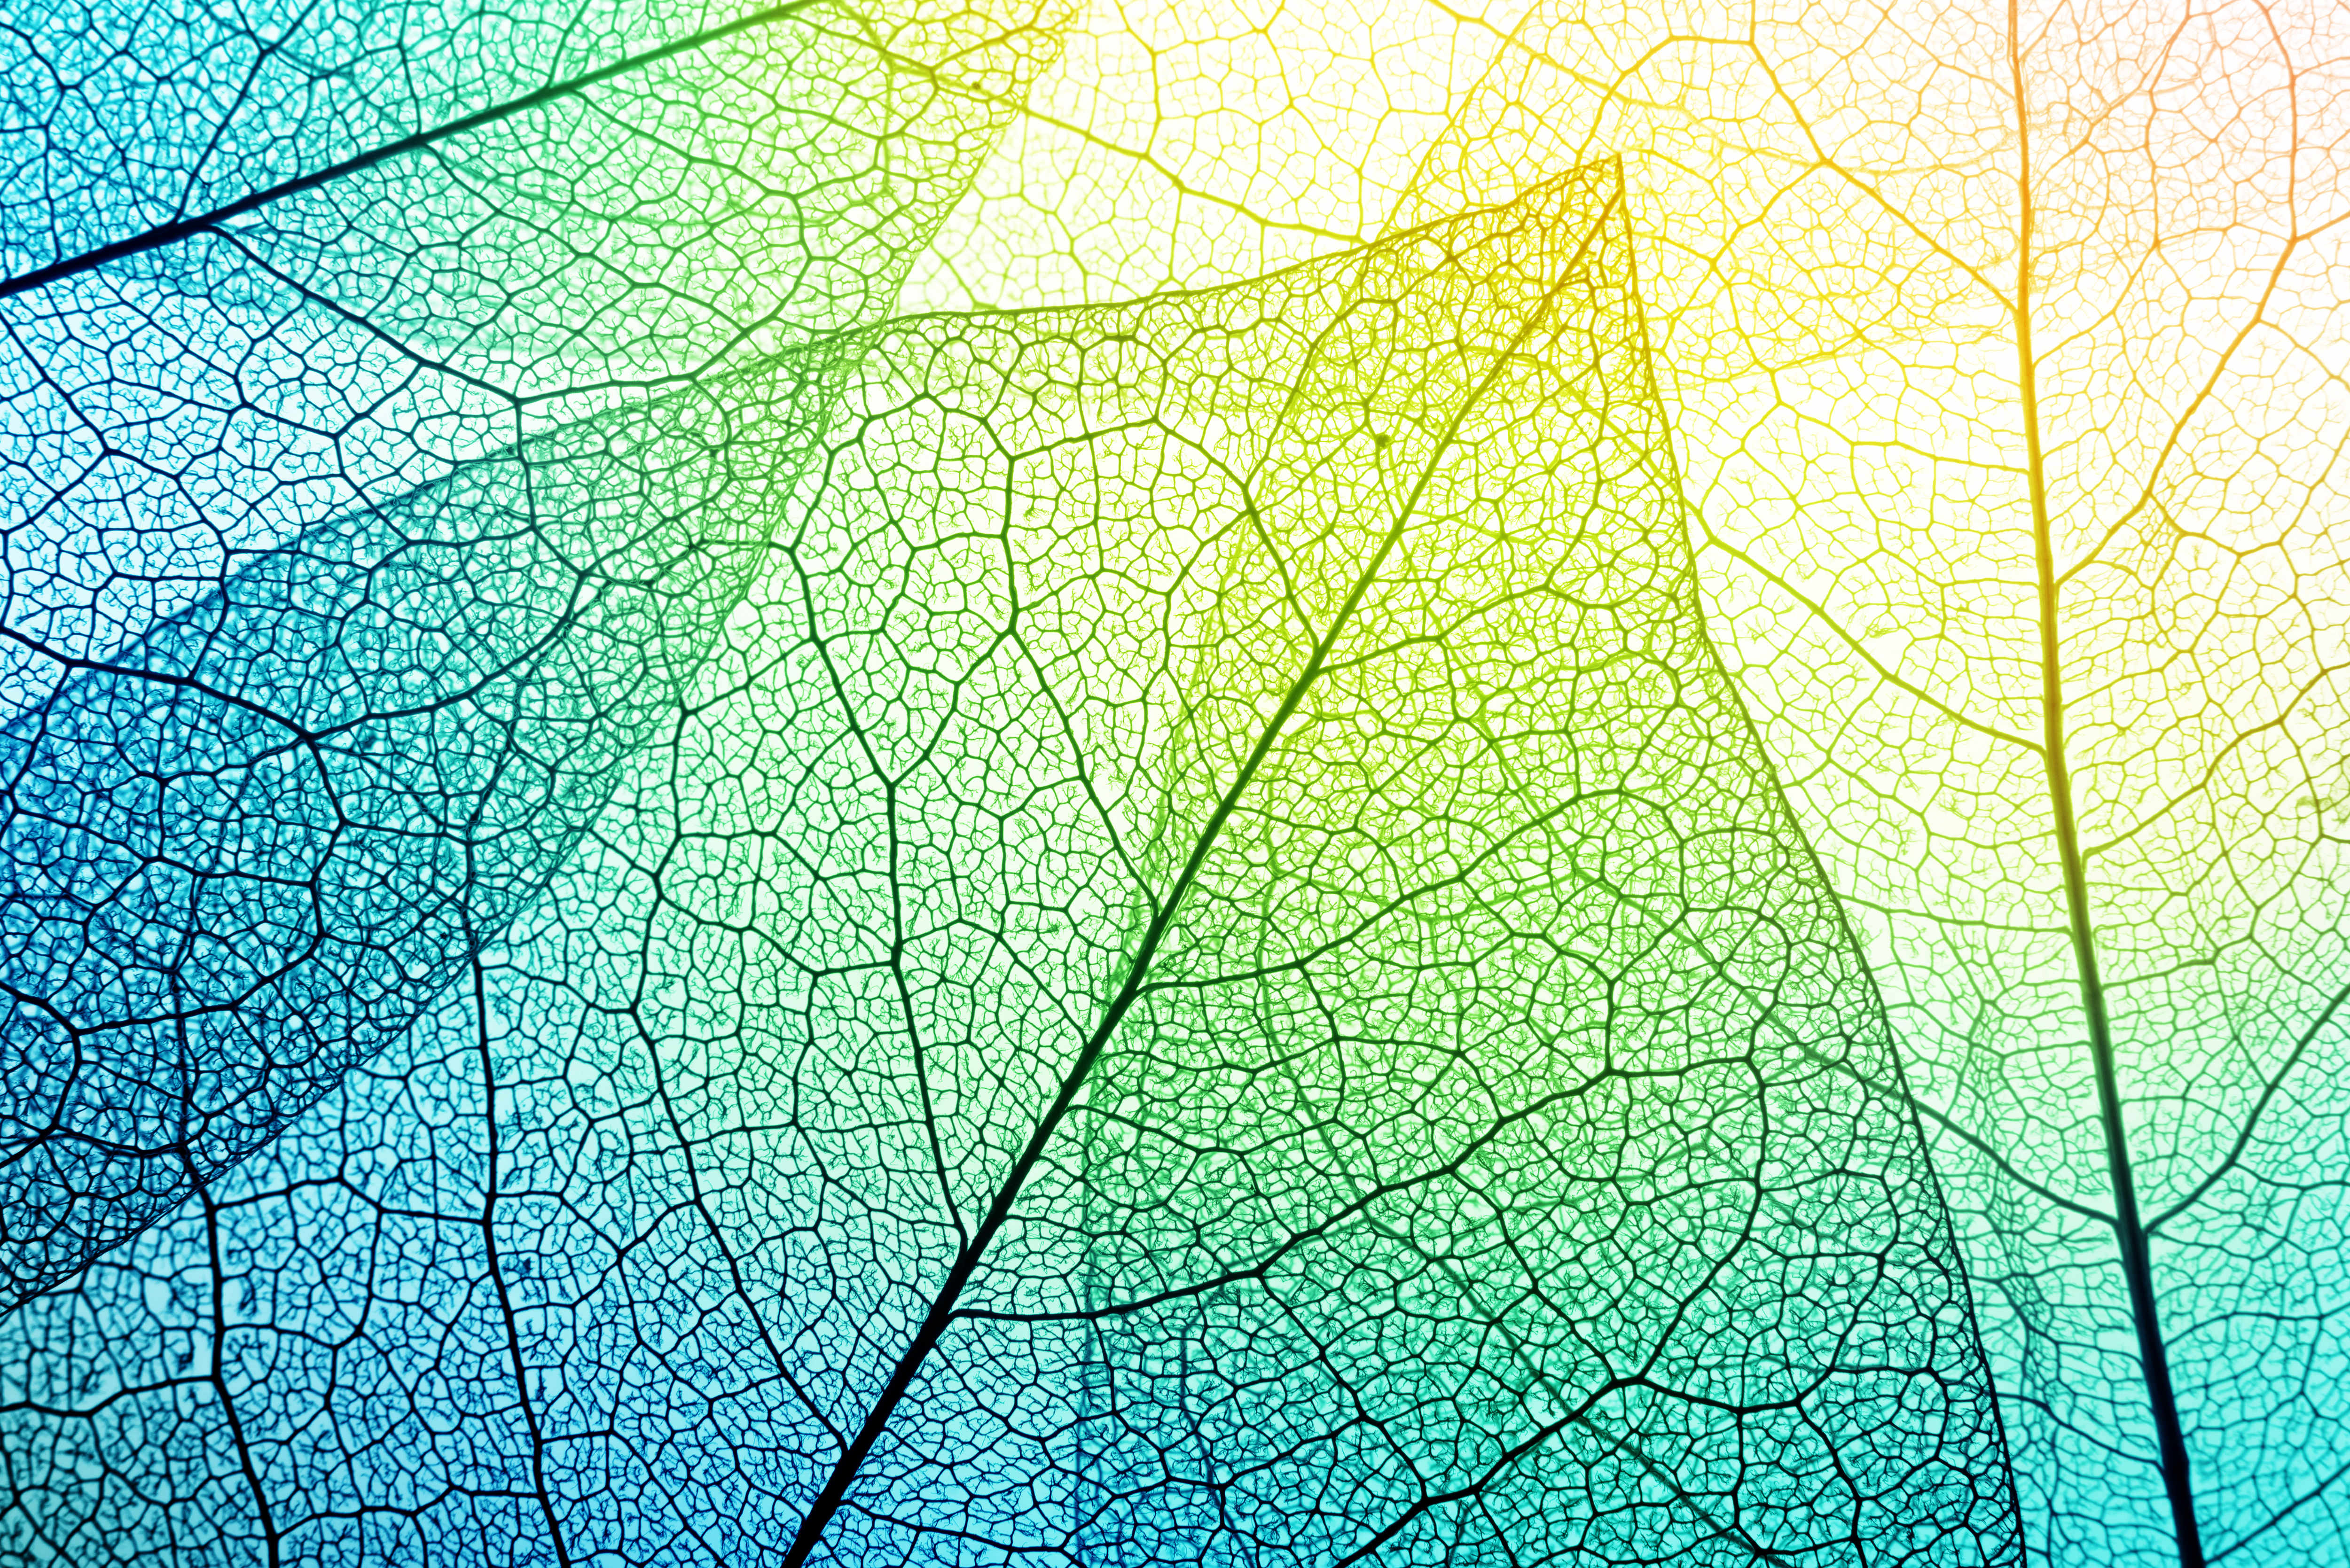 Fractal patterns within leaves